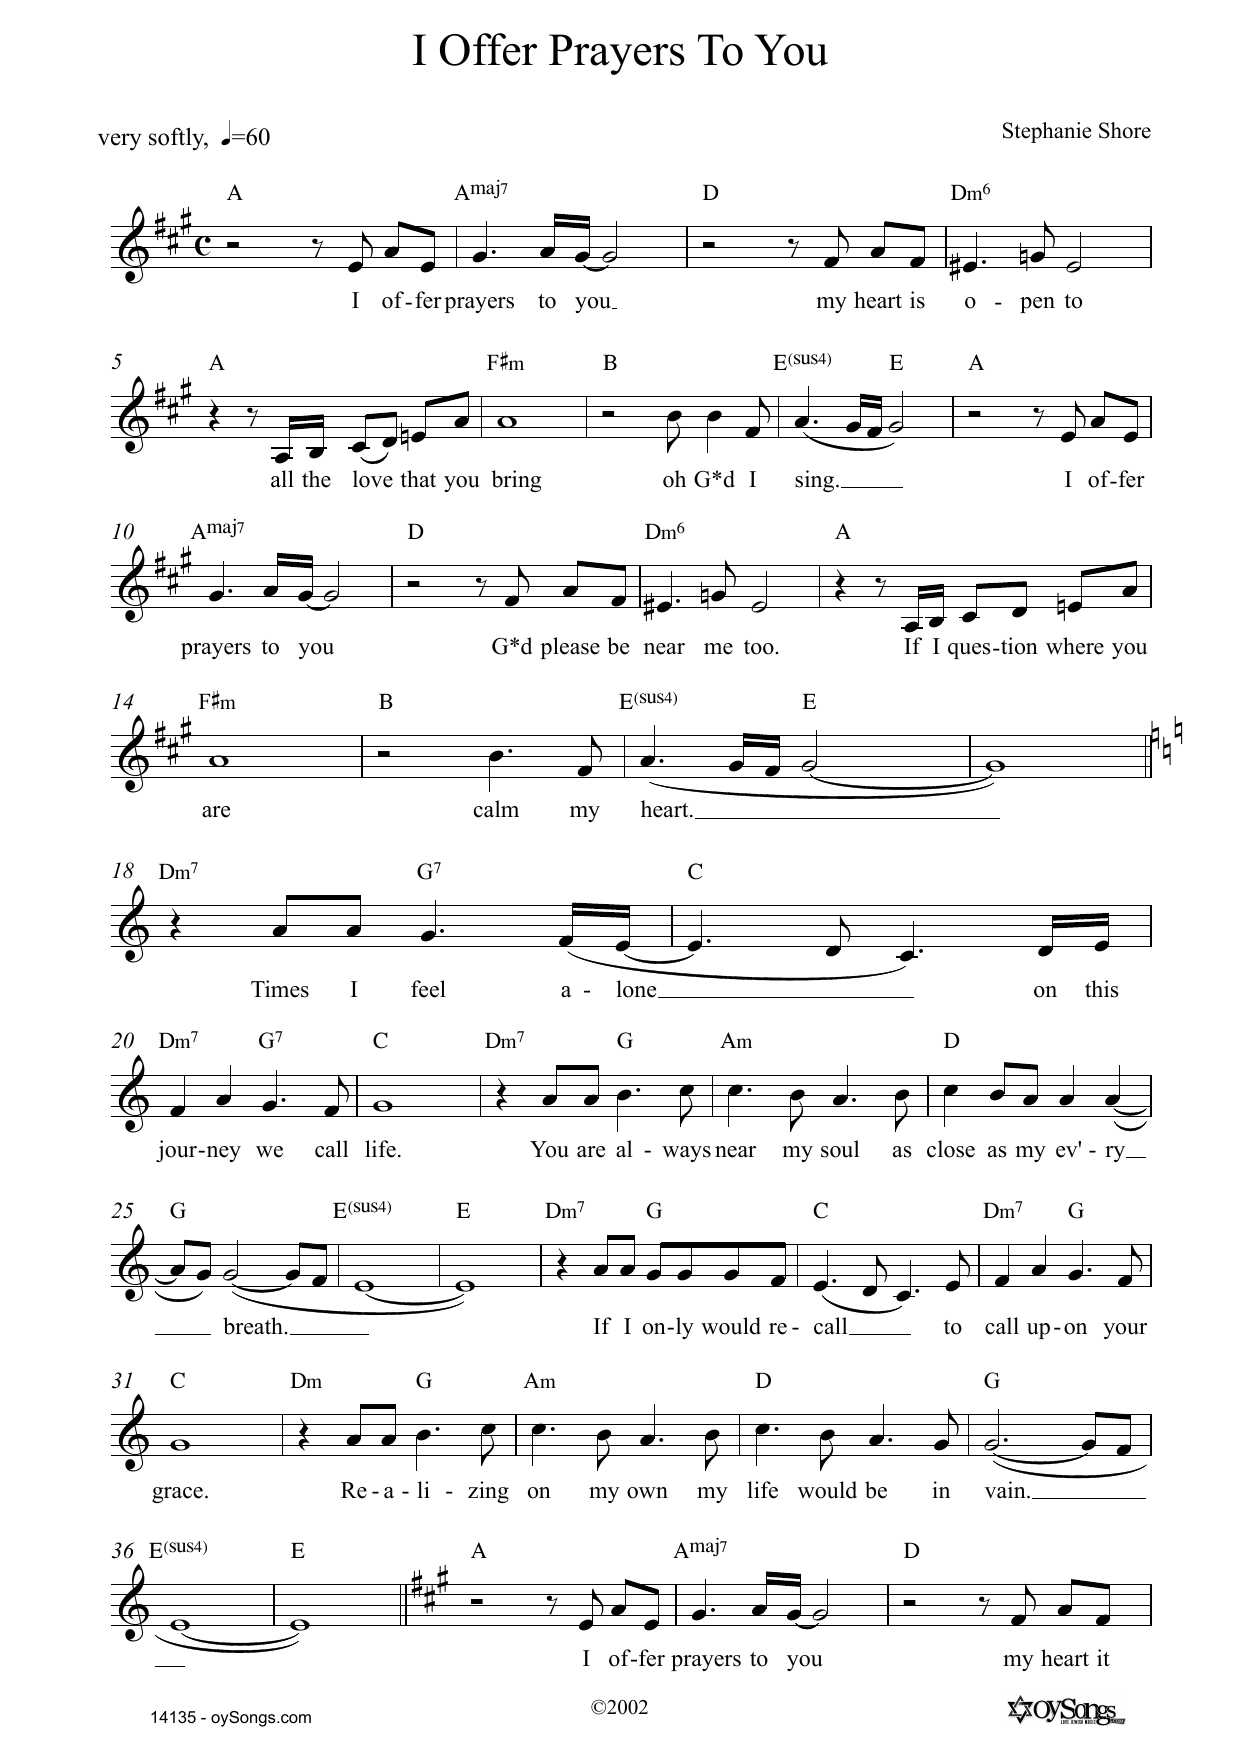 Download Stephanie Shore I Offer Prayers To You Sheet Music